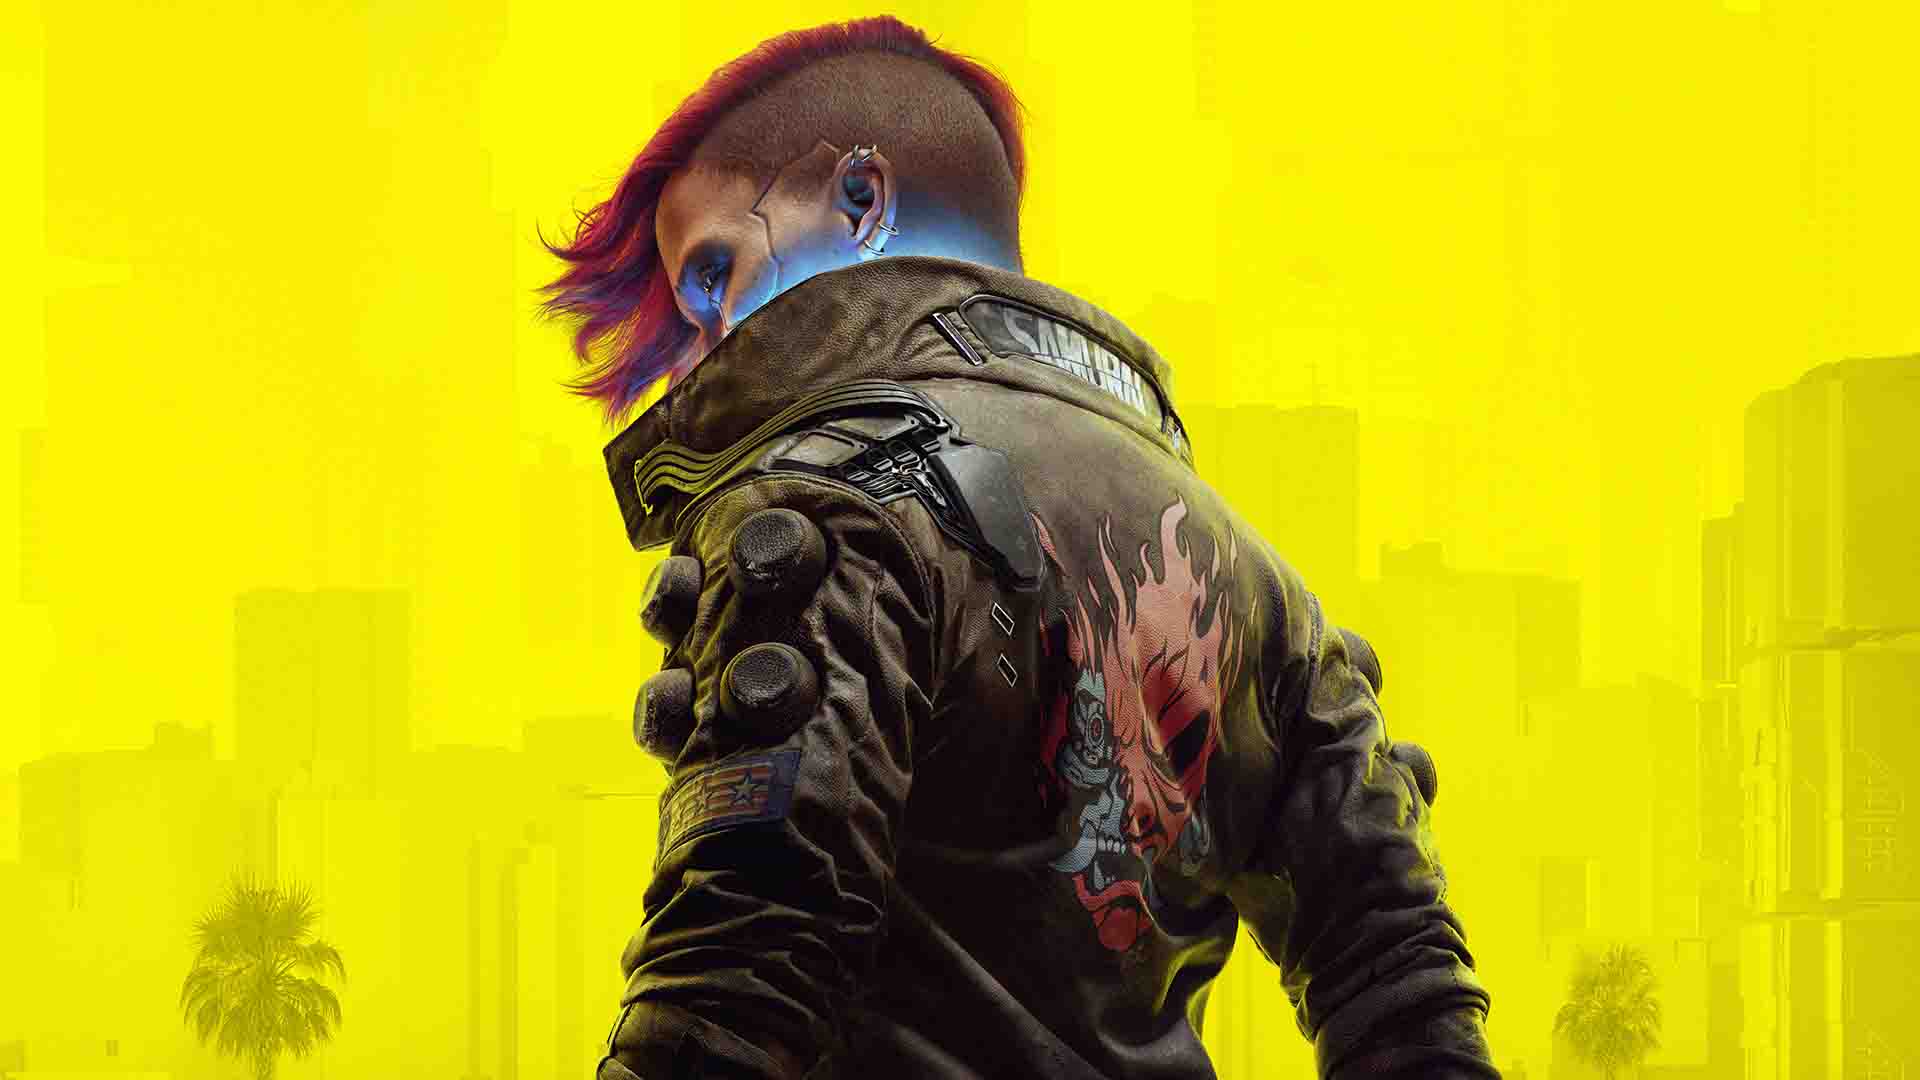 Cyberpunk 2077 Edgerunner build guide How to play as Lucy